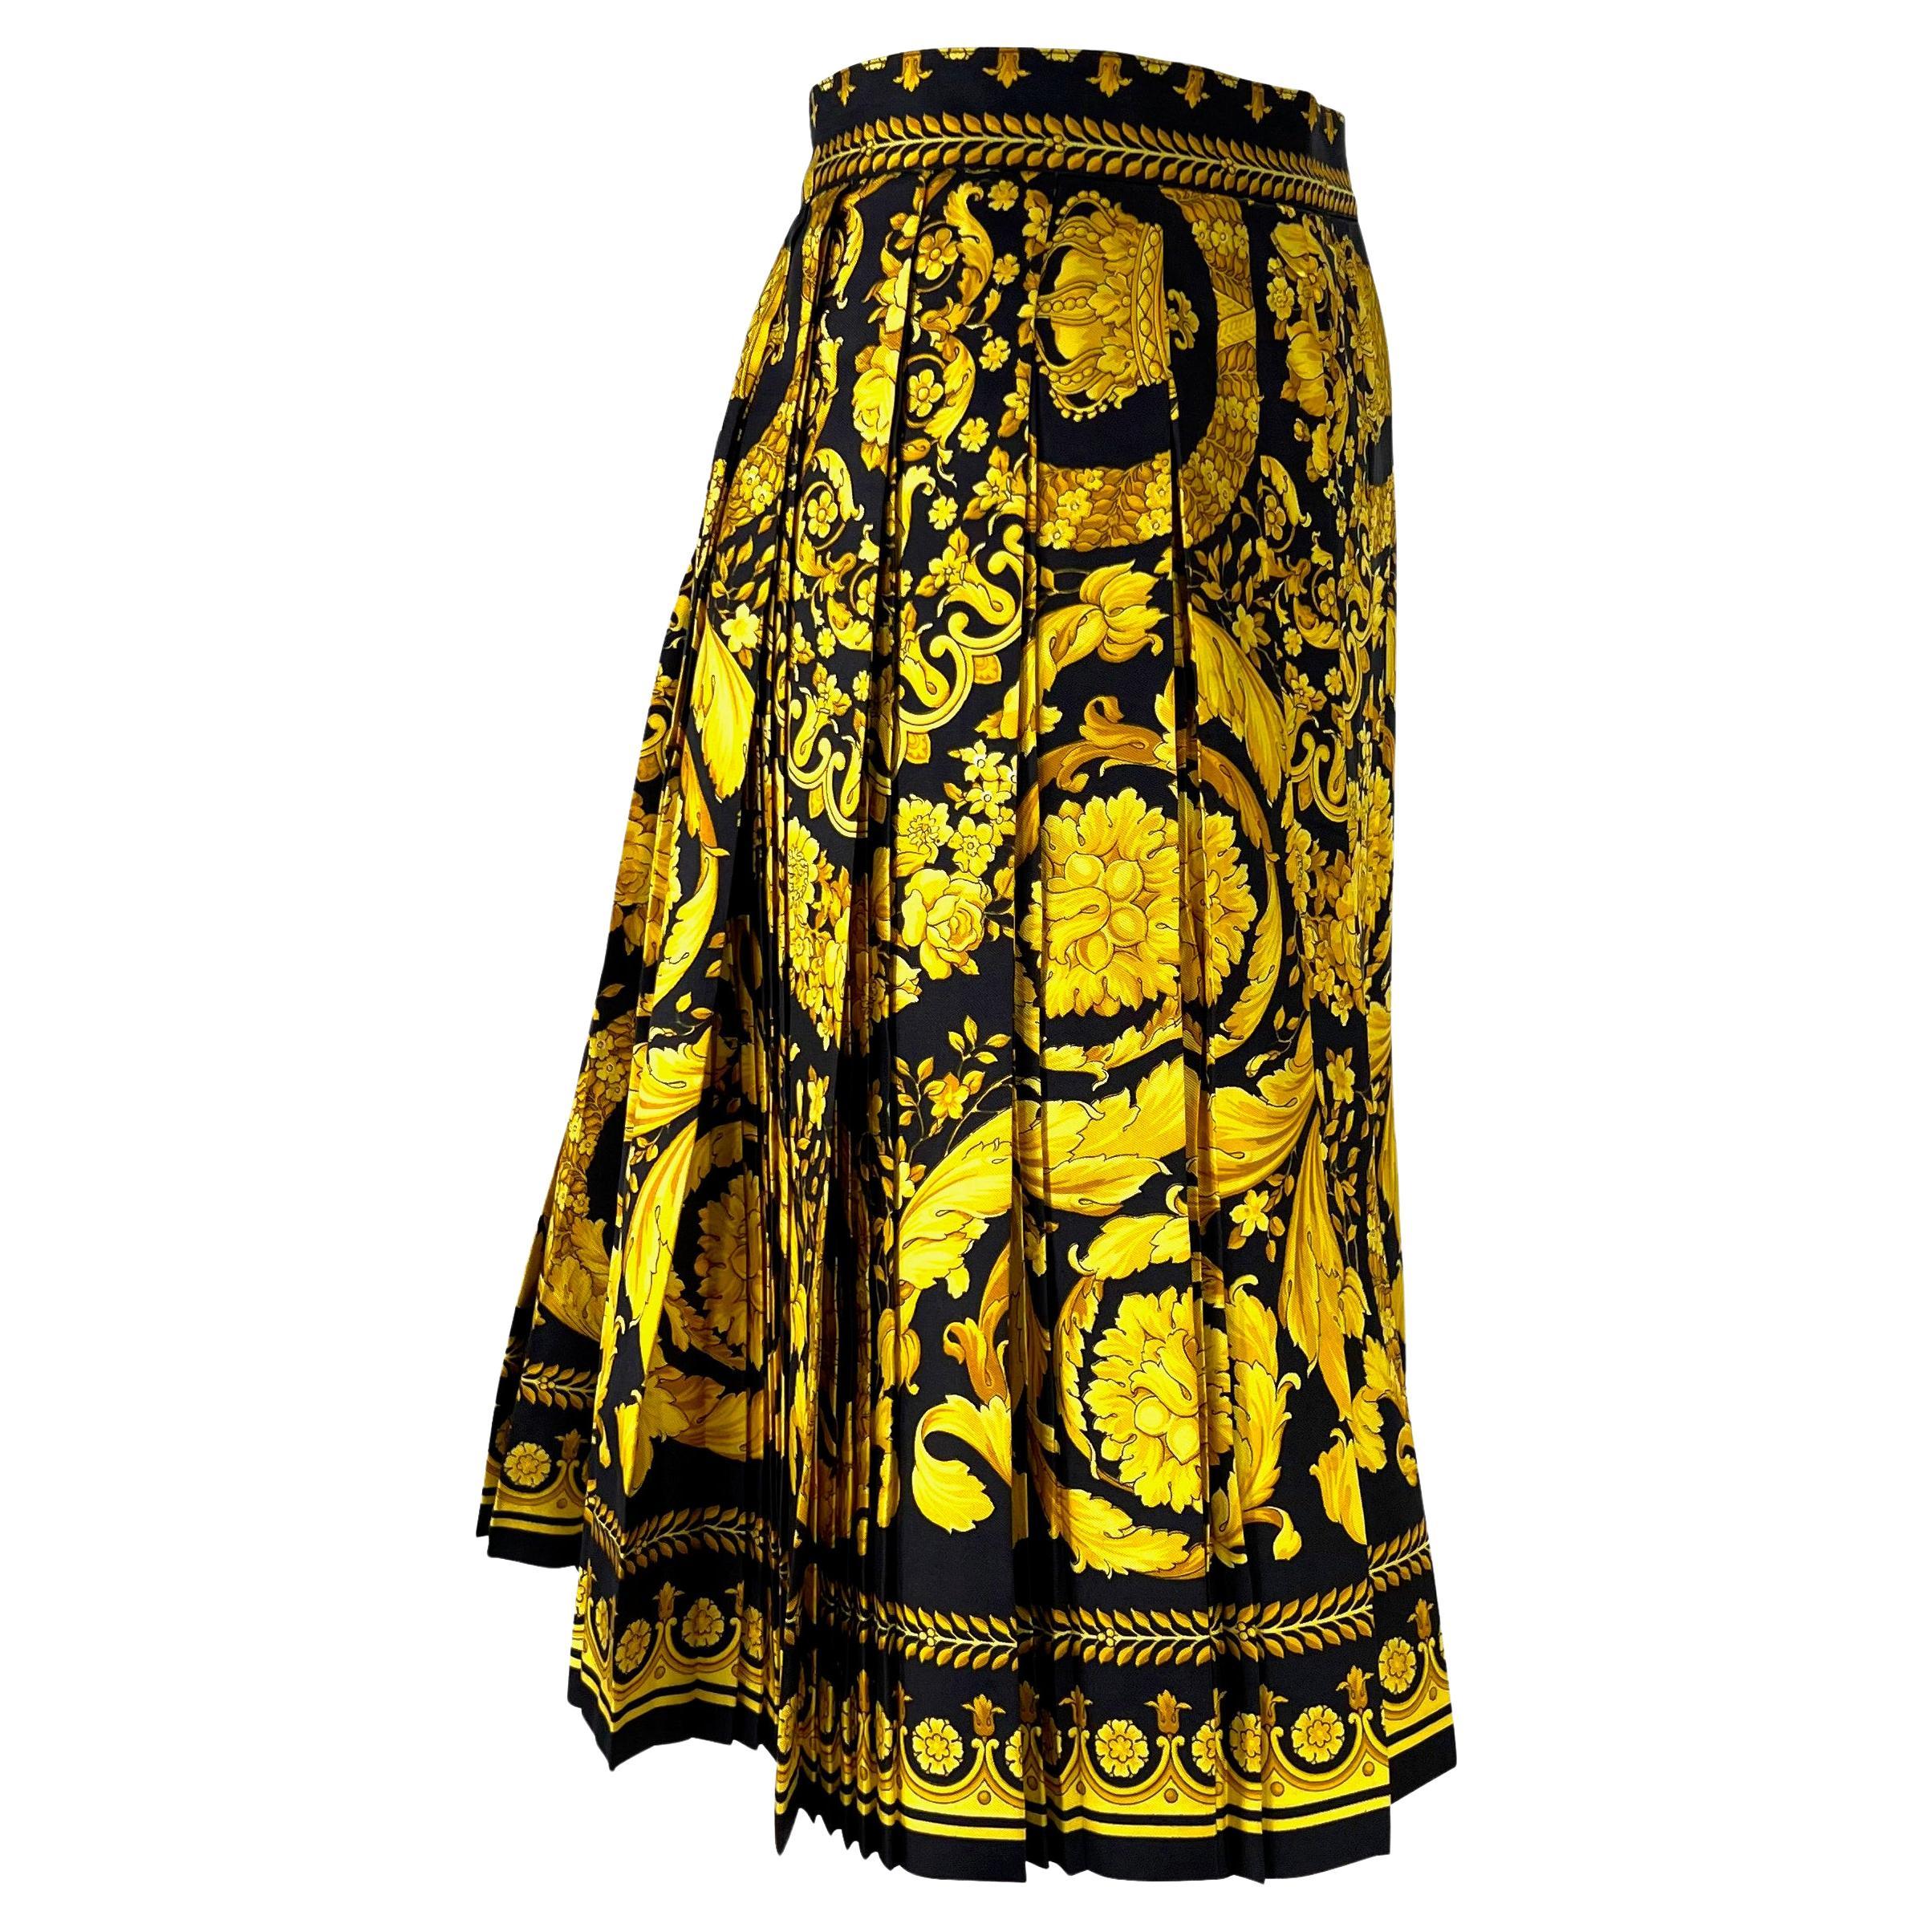 S/S 1992 Gianni Versace Couture Black Gold Baroque Print Pleated Skirt In Excellent Condition For Sale In West Hollywood, CA